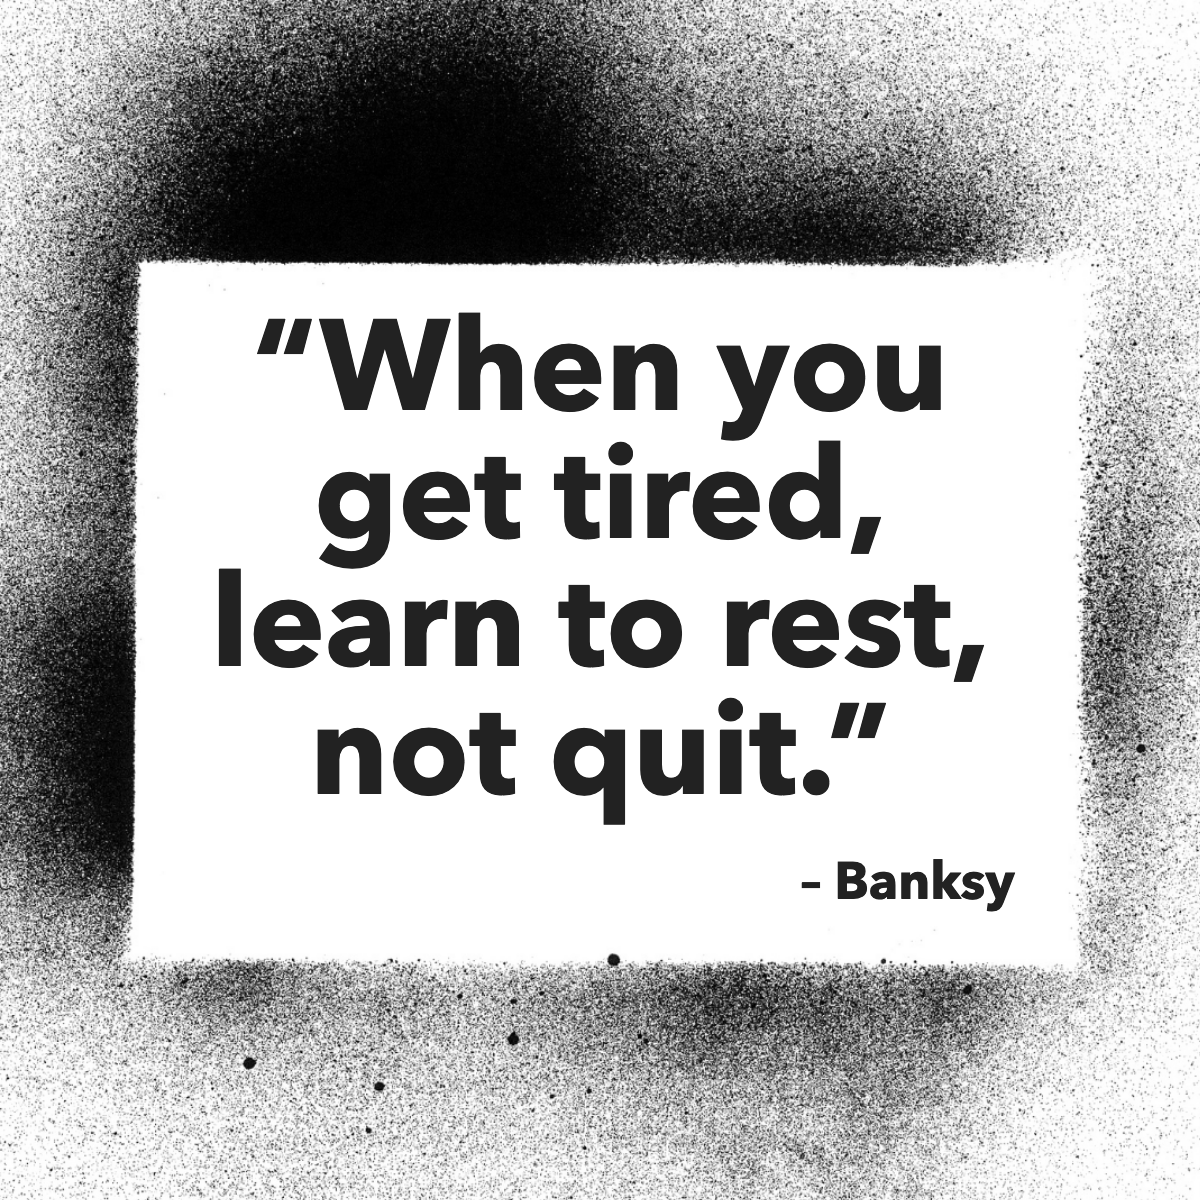 Don't feel guilty if you ever get tired, take your time ... 😉

#motivationnation    #motivationalquotesdaily    #quoteoftheday    #quoteofday    #quotedaily

#AndreaDavis